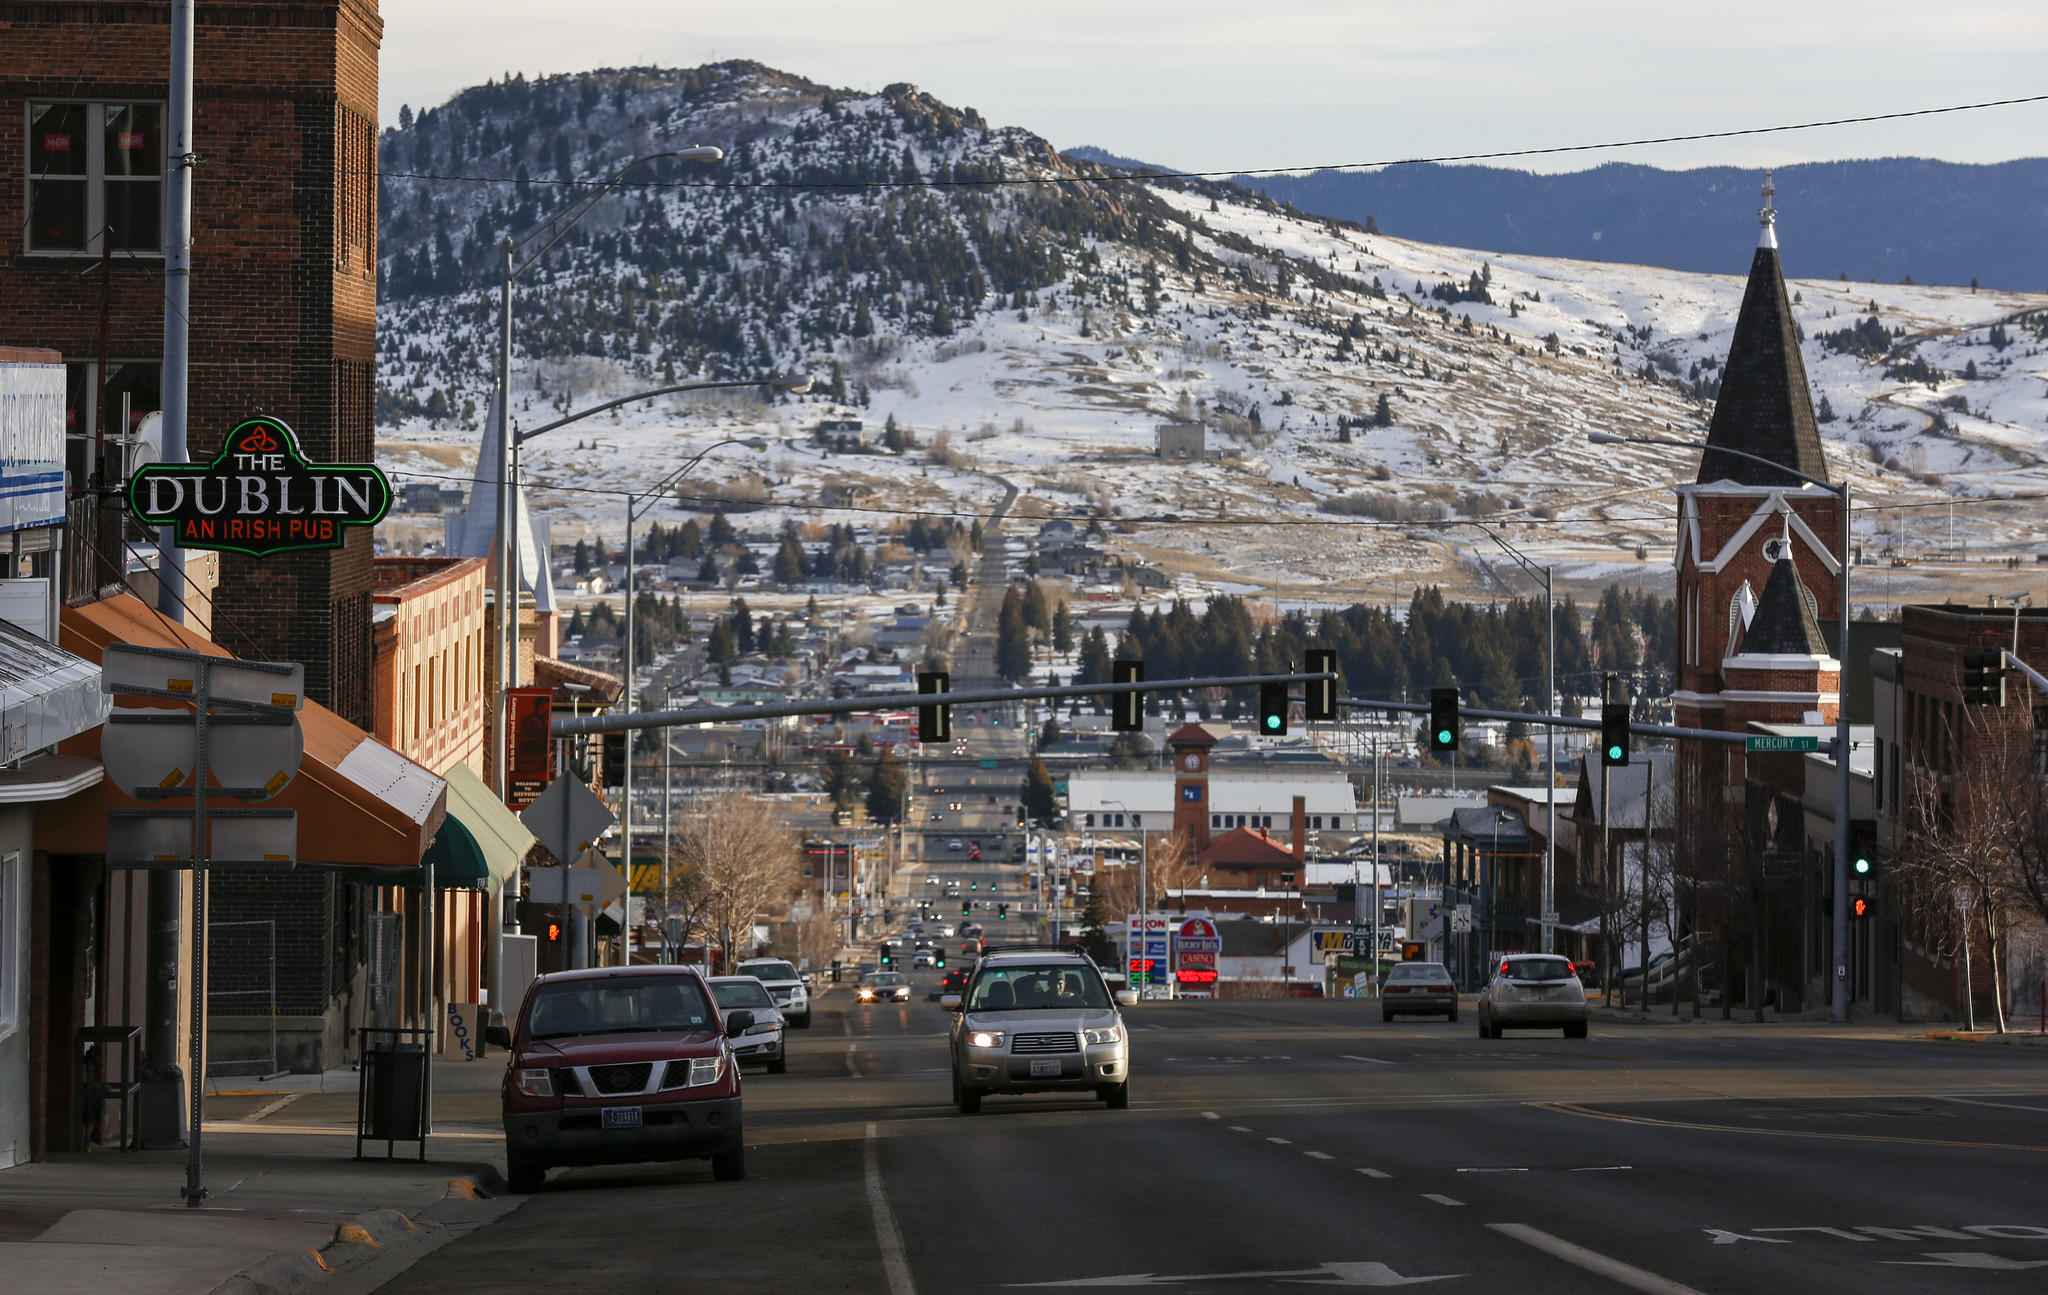 The view looking down Montana Street in Butte, Montana.